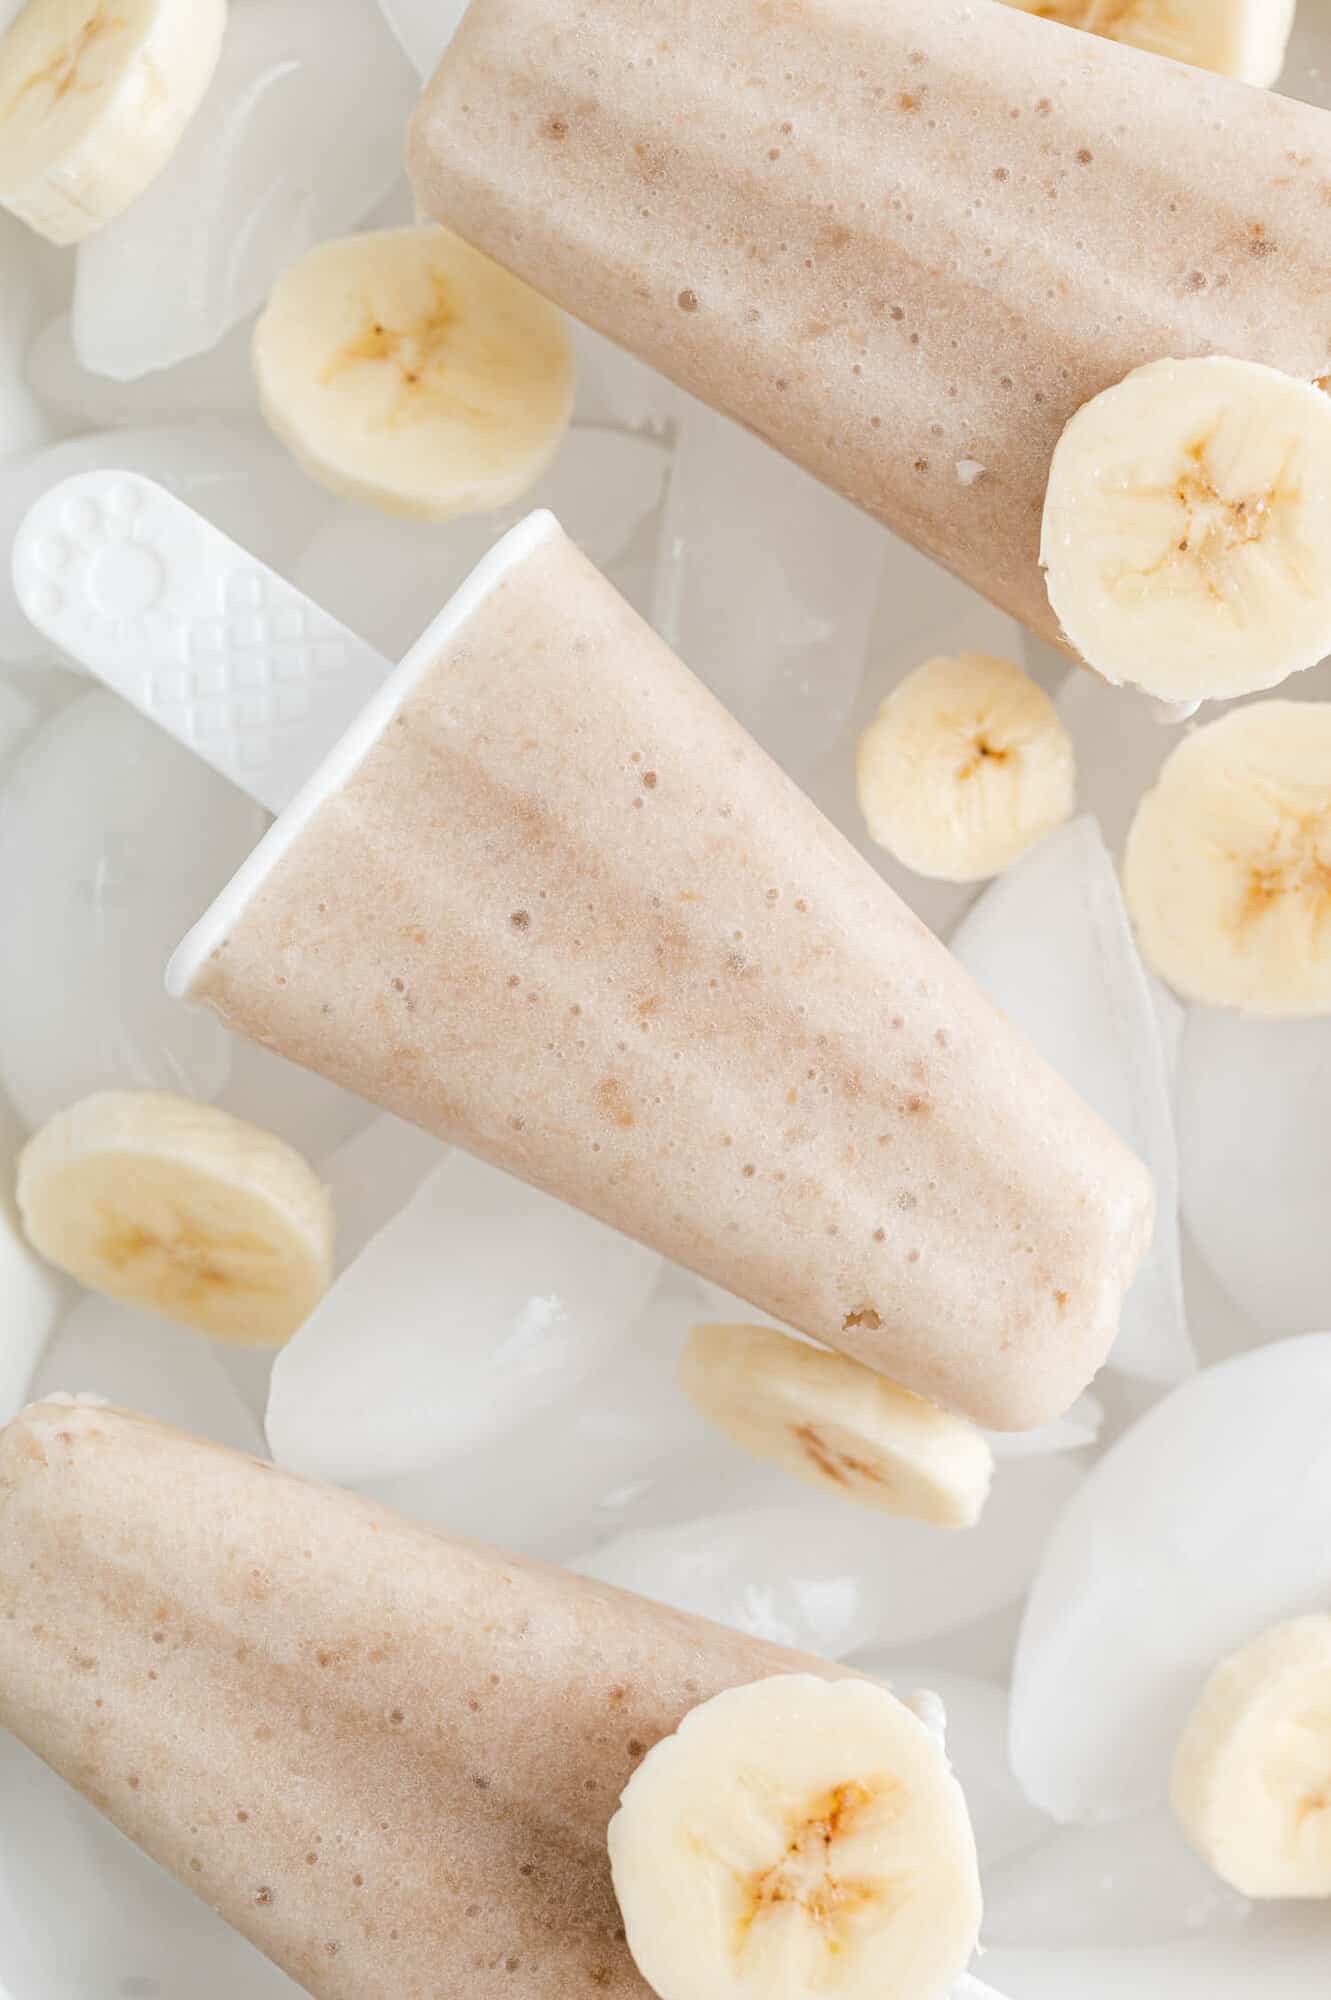 Banana popsicles with banana slices nearby.